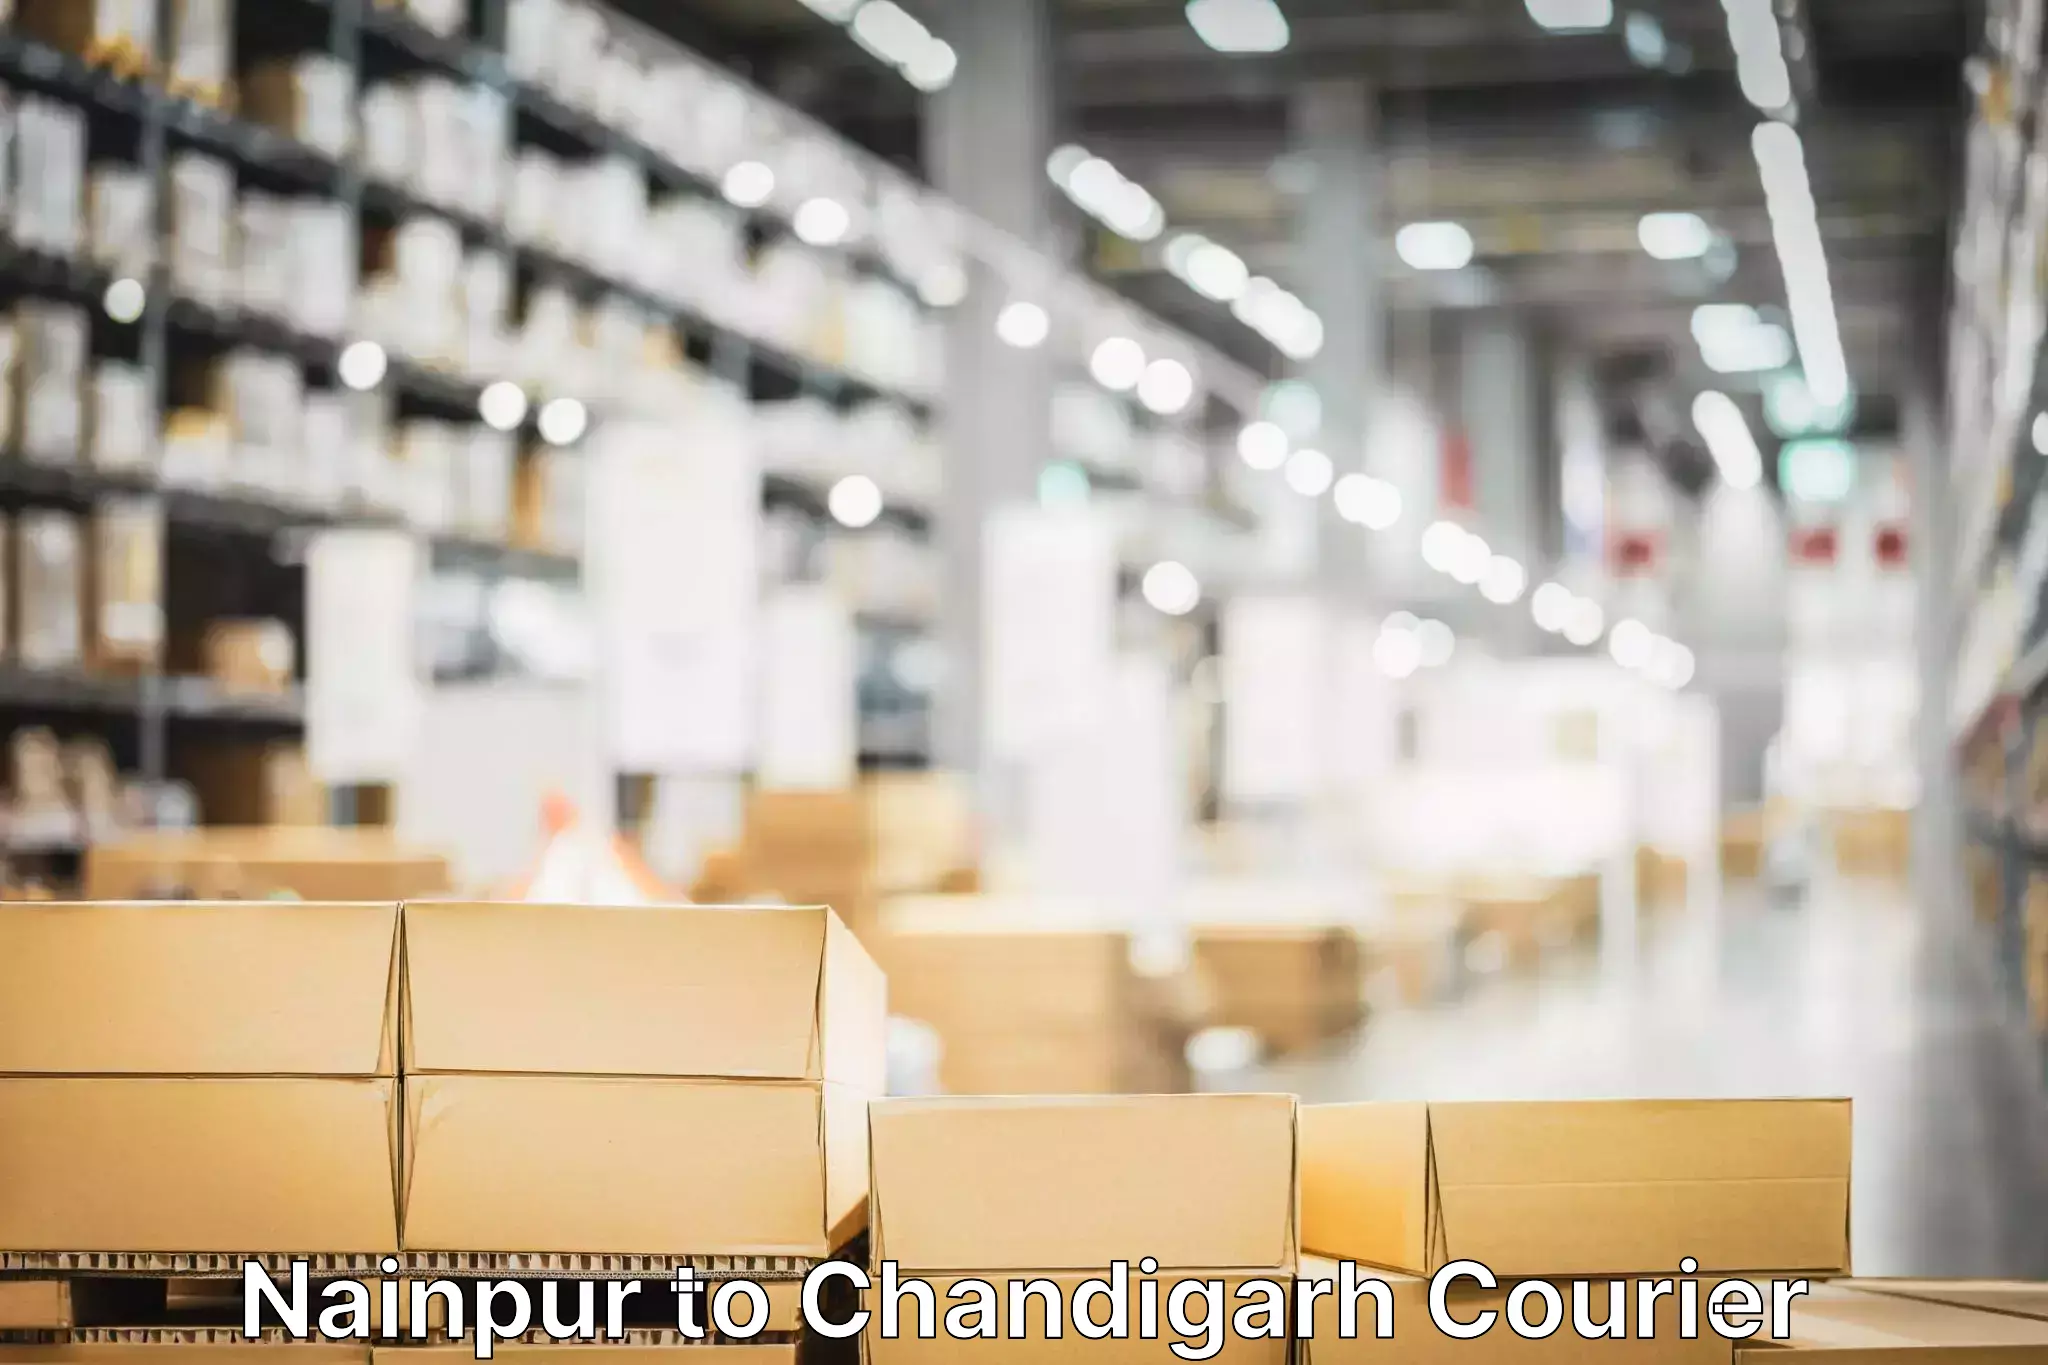 Customer-focused courier Nainpur to Chandigarh